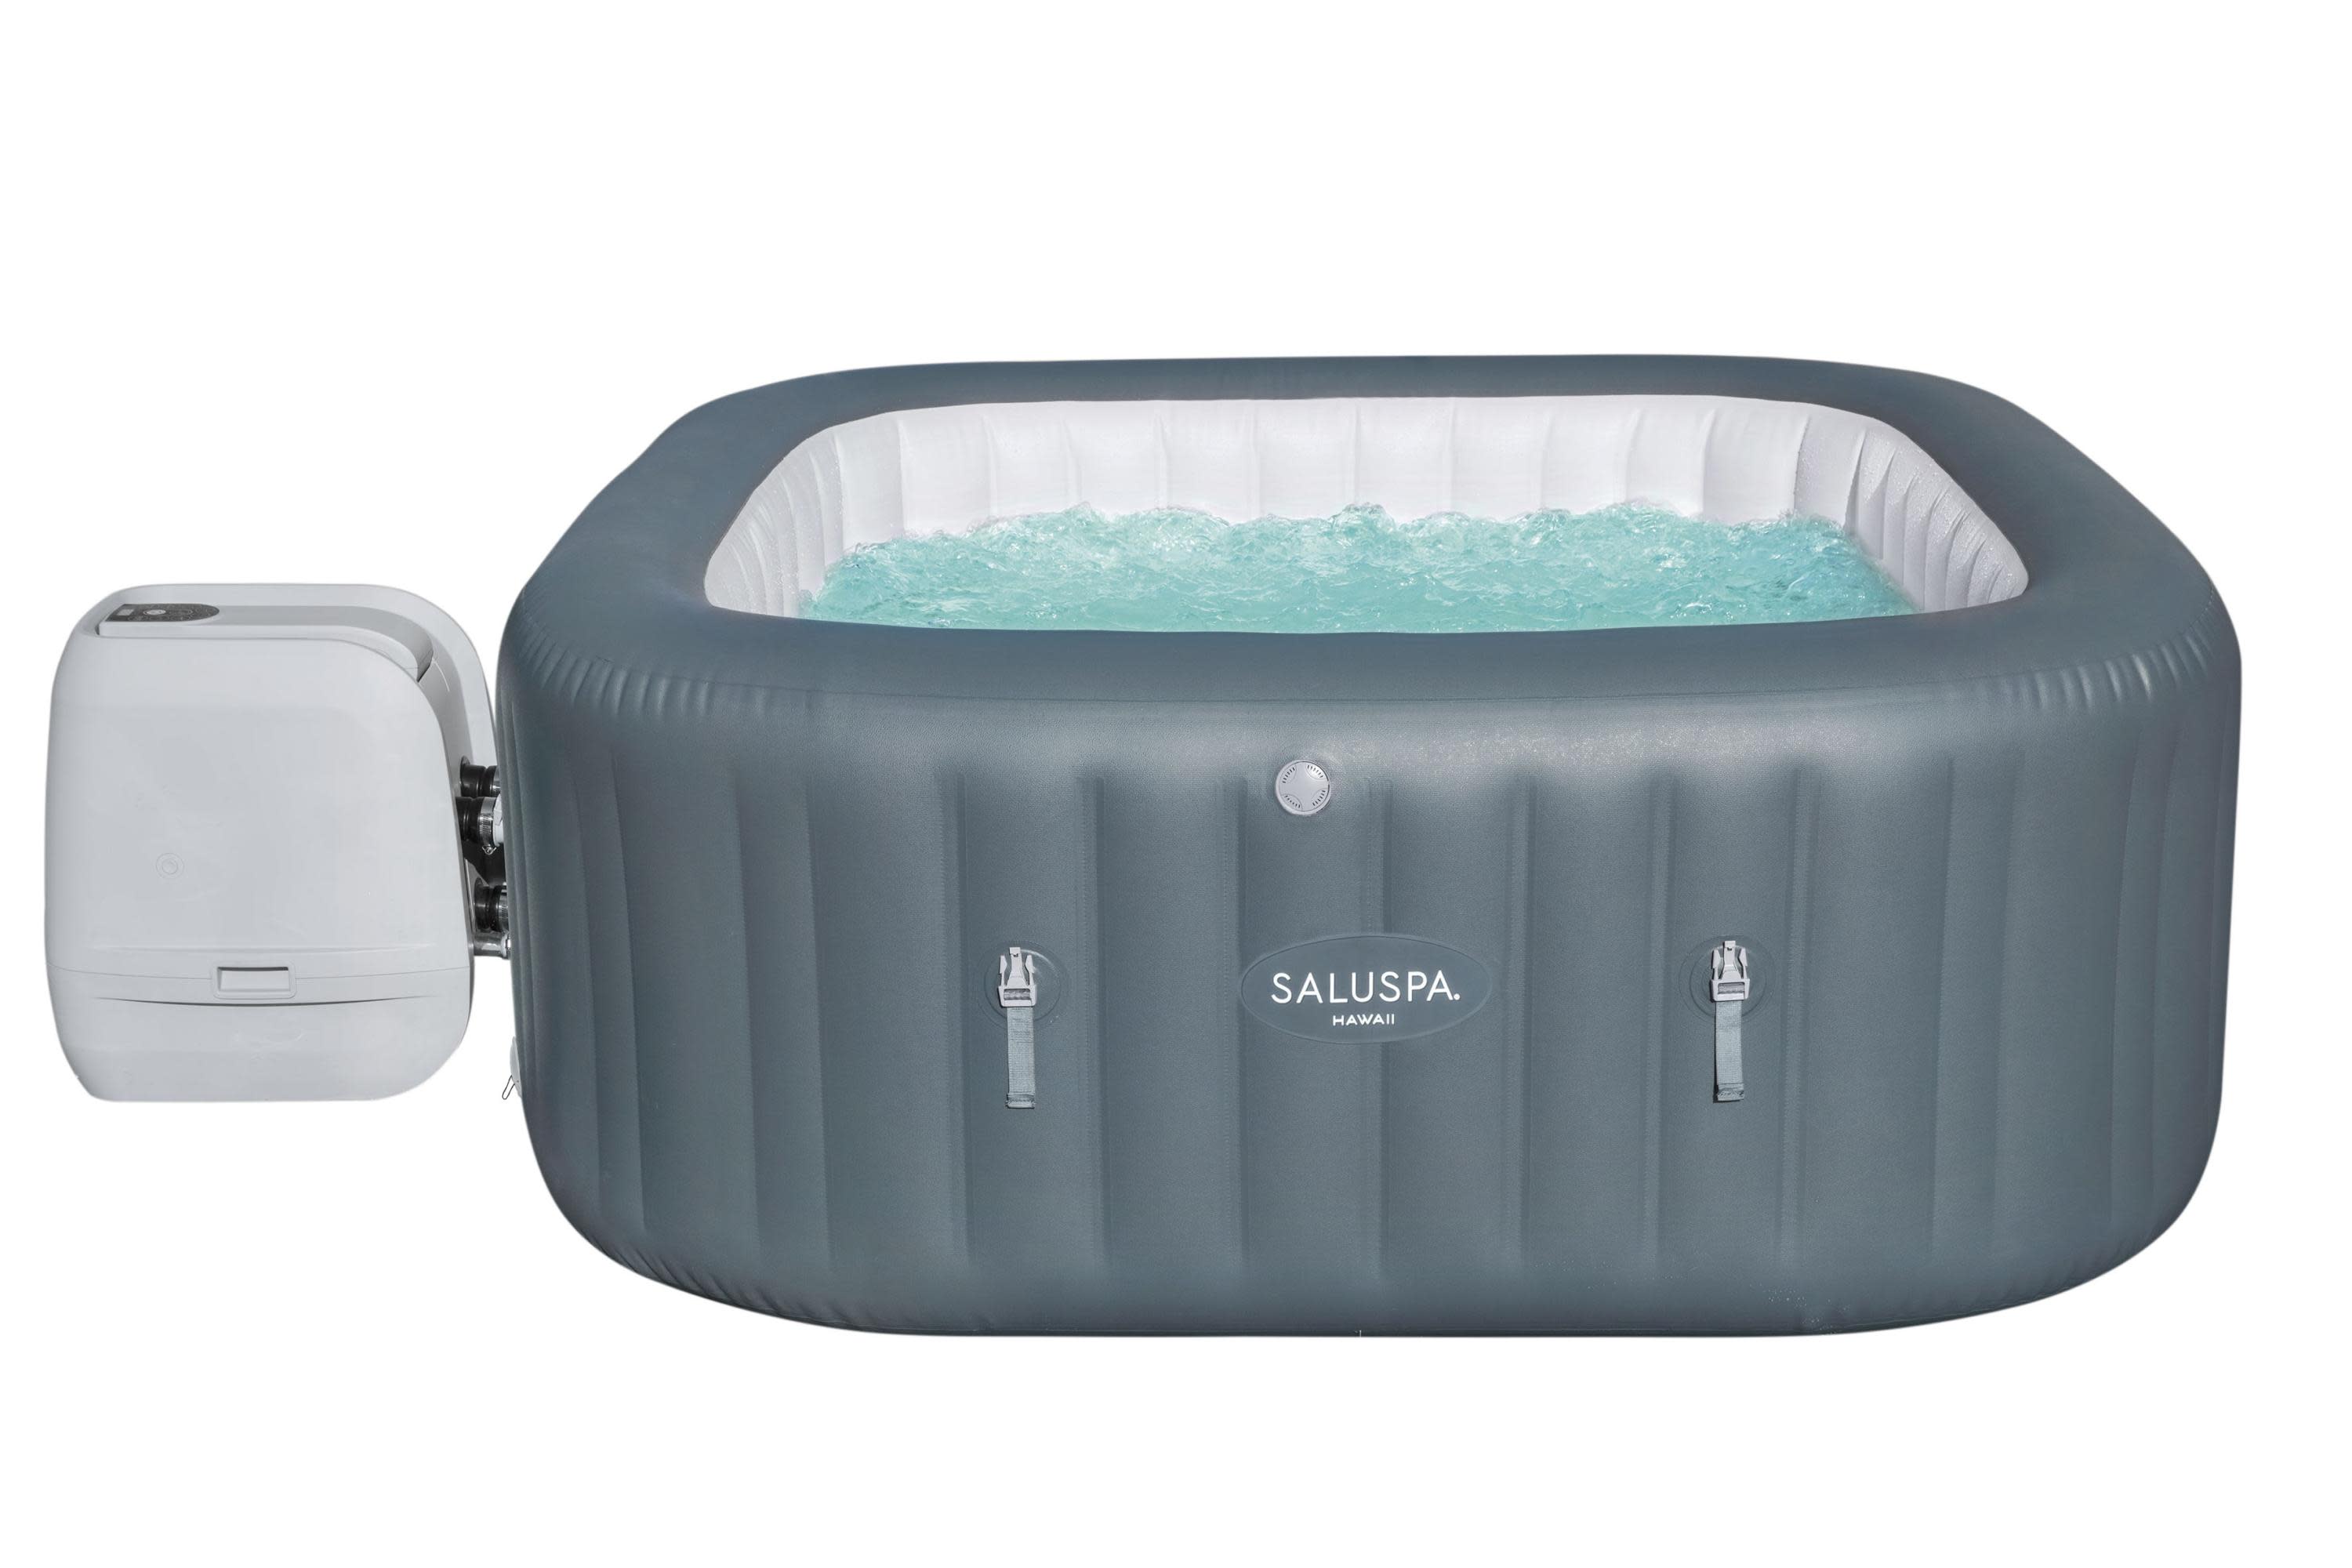 SaluSpa Hawaii HydroJet Pro Inflatable Hot Tub Spa 4-6 Person - image 1 of 9